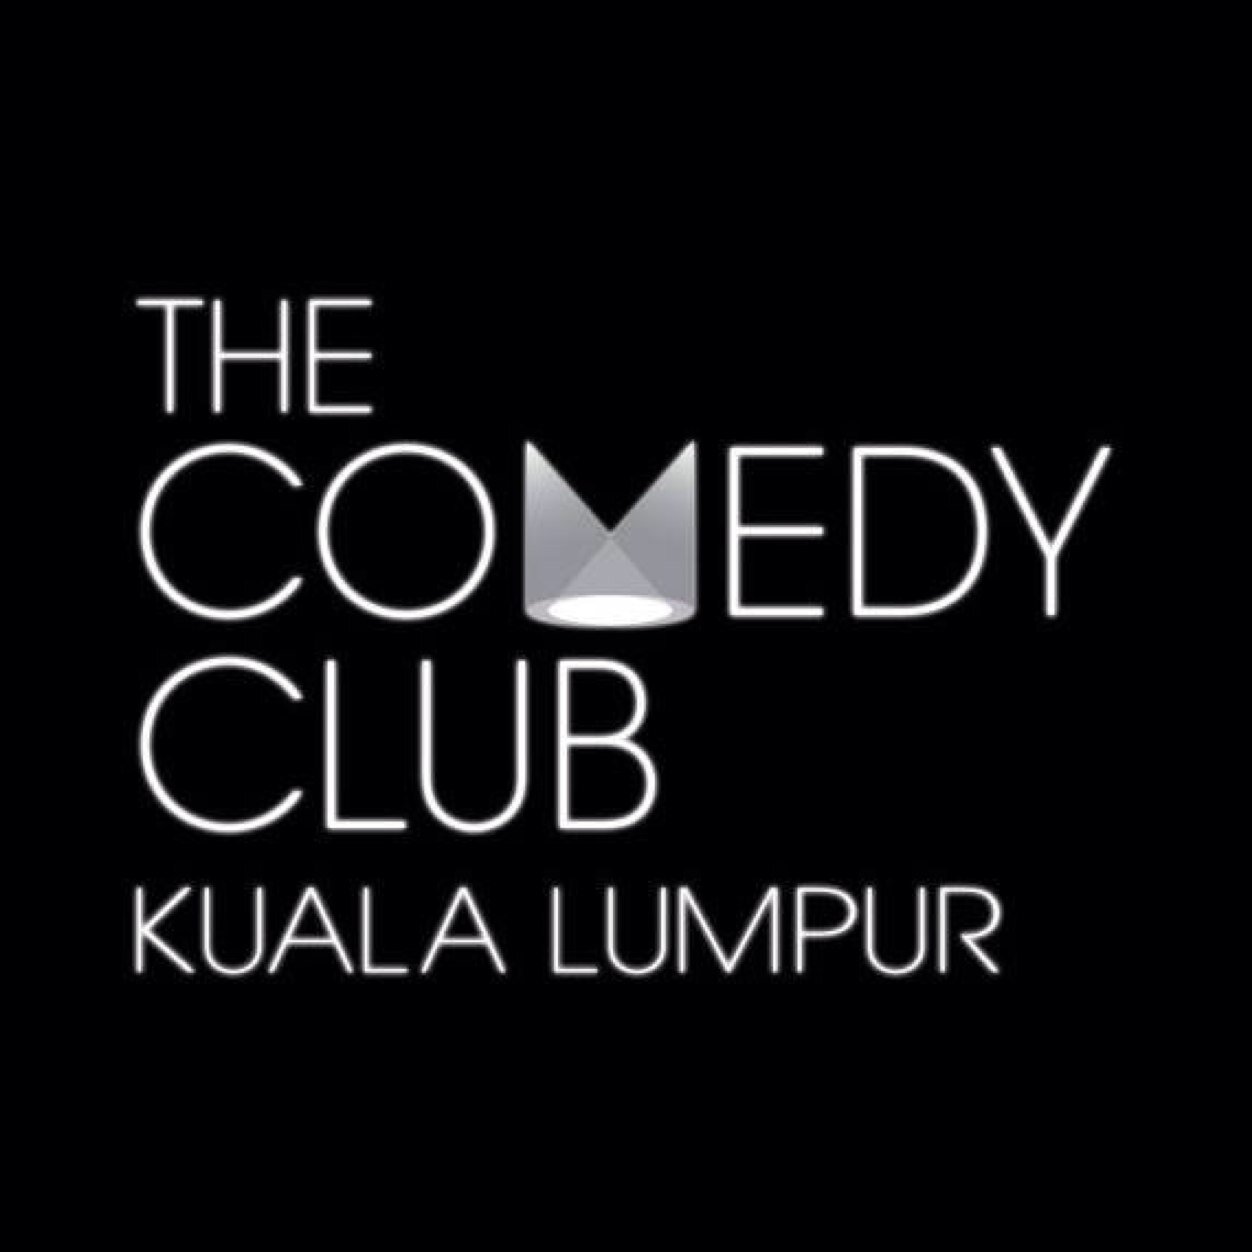 For the fans of comedy in Kuala Lumpur and Malaysia. Get updates and inside scoop to the funniest stand-up comedy shows around!